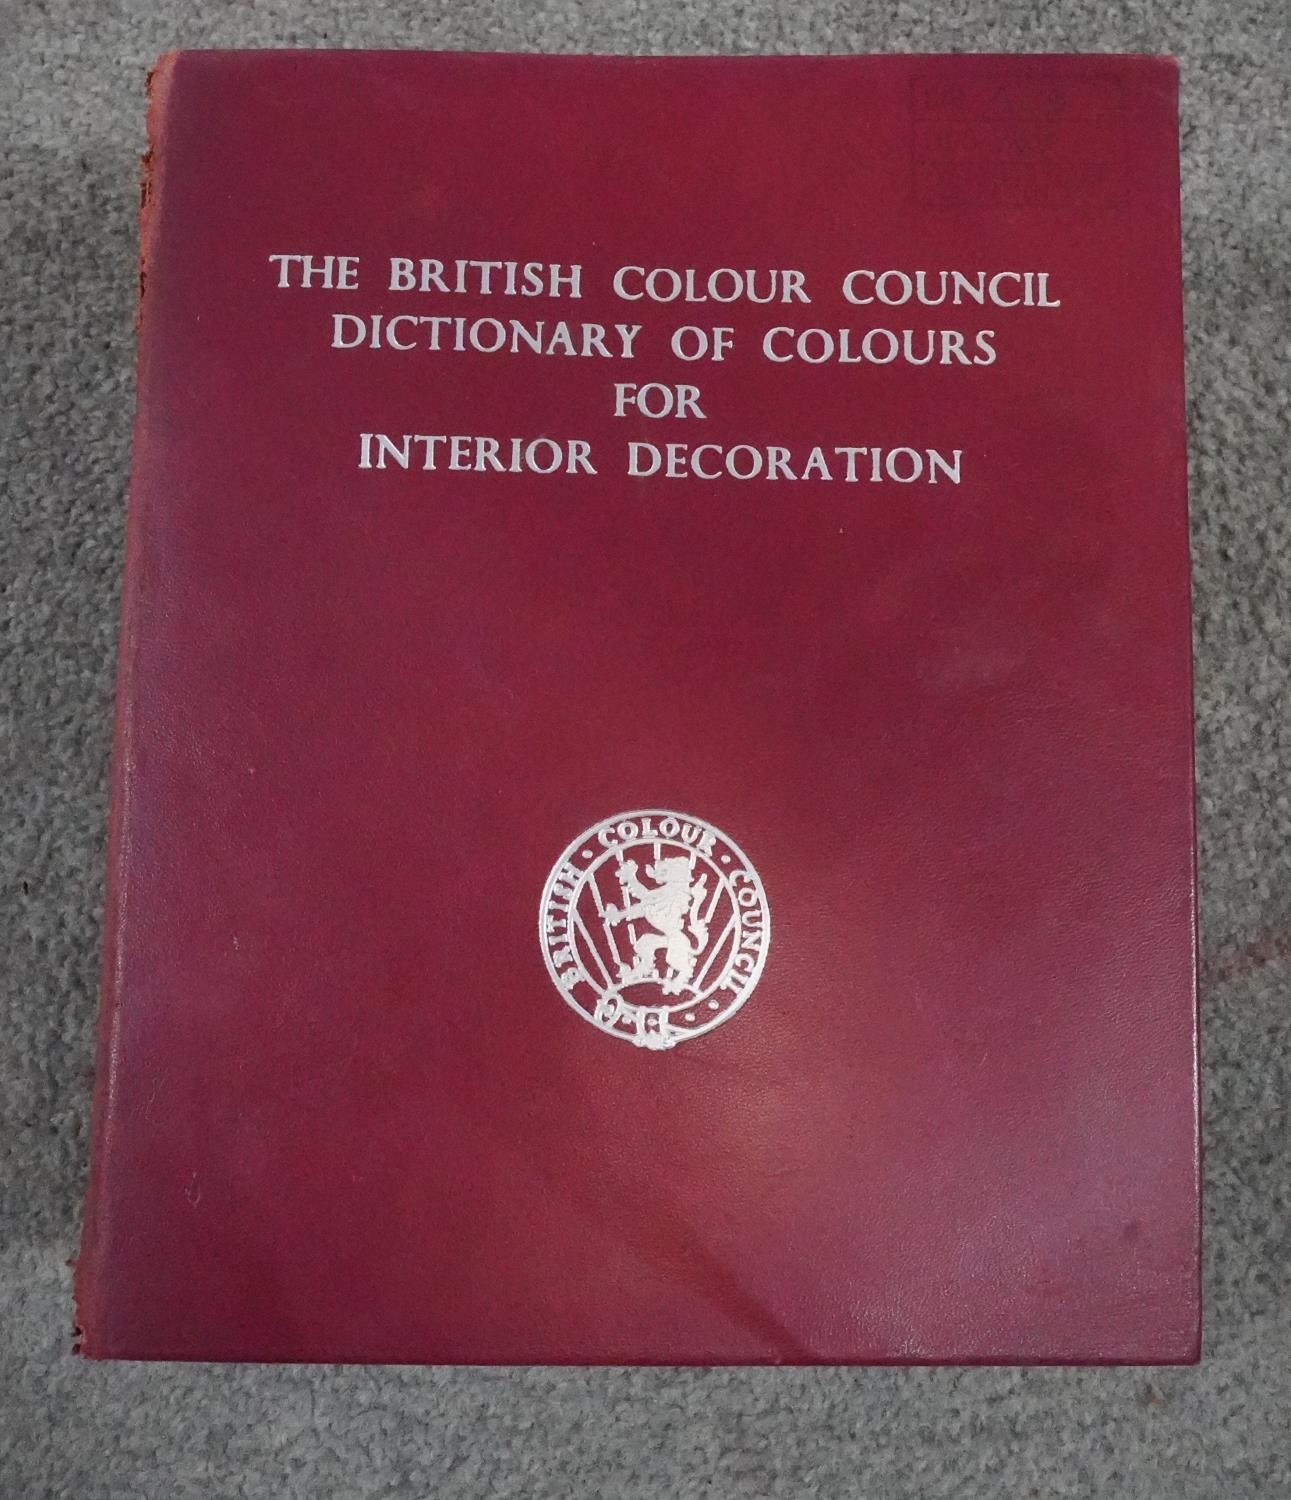 The British Colour Council Dictionary of Colours for Interior Decoration. Edition 2943, London. - Image 4 of 10